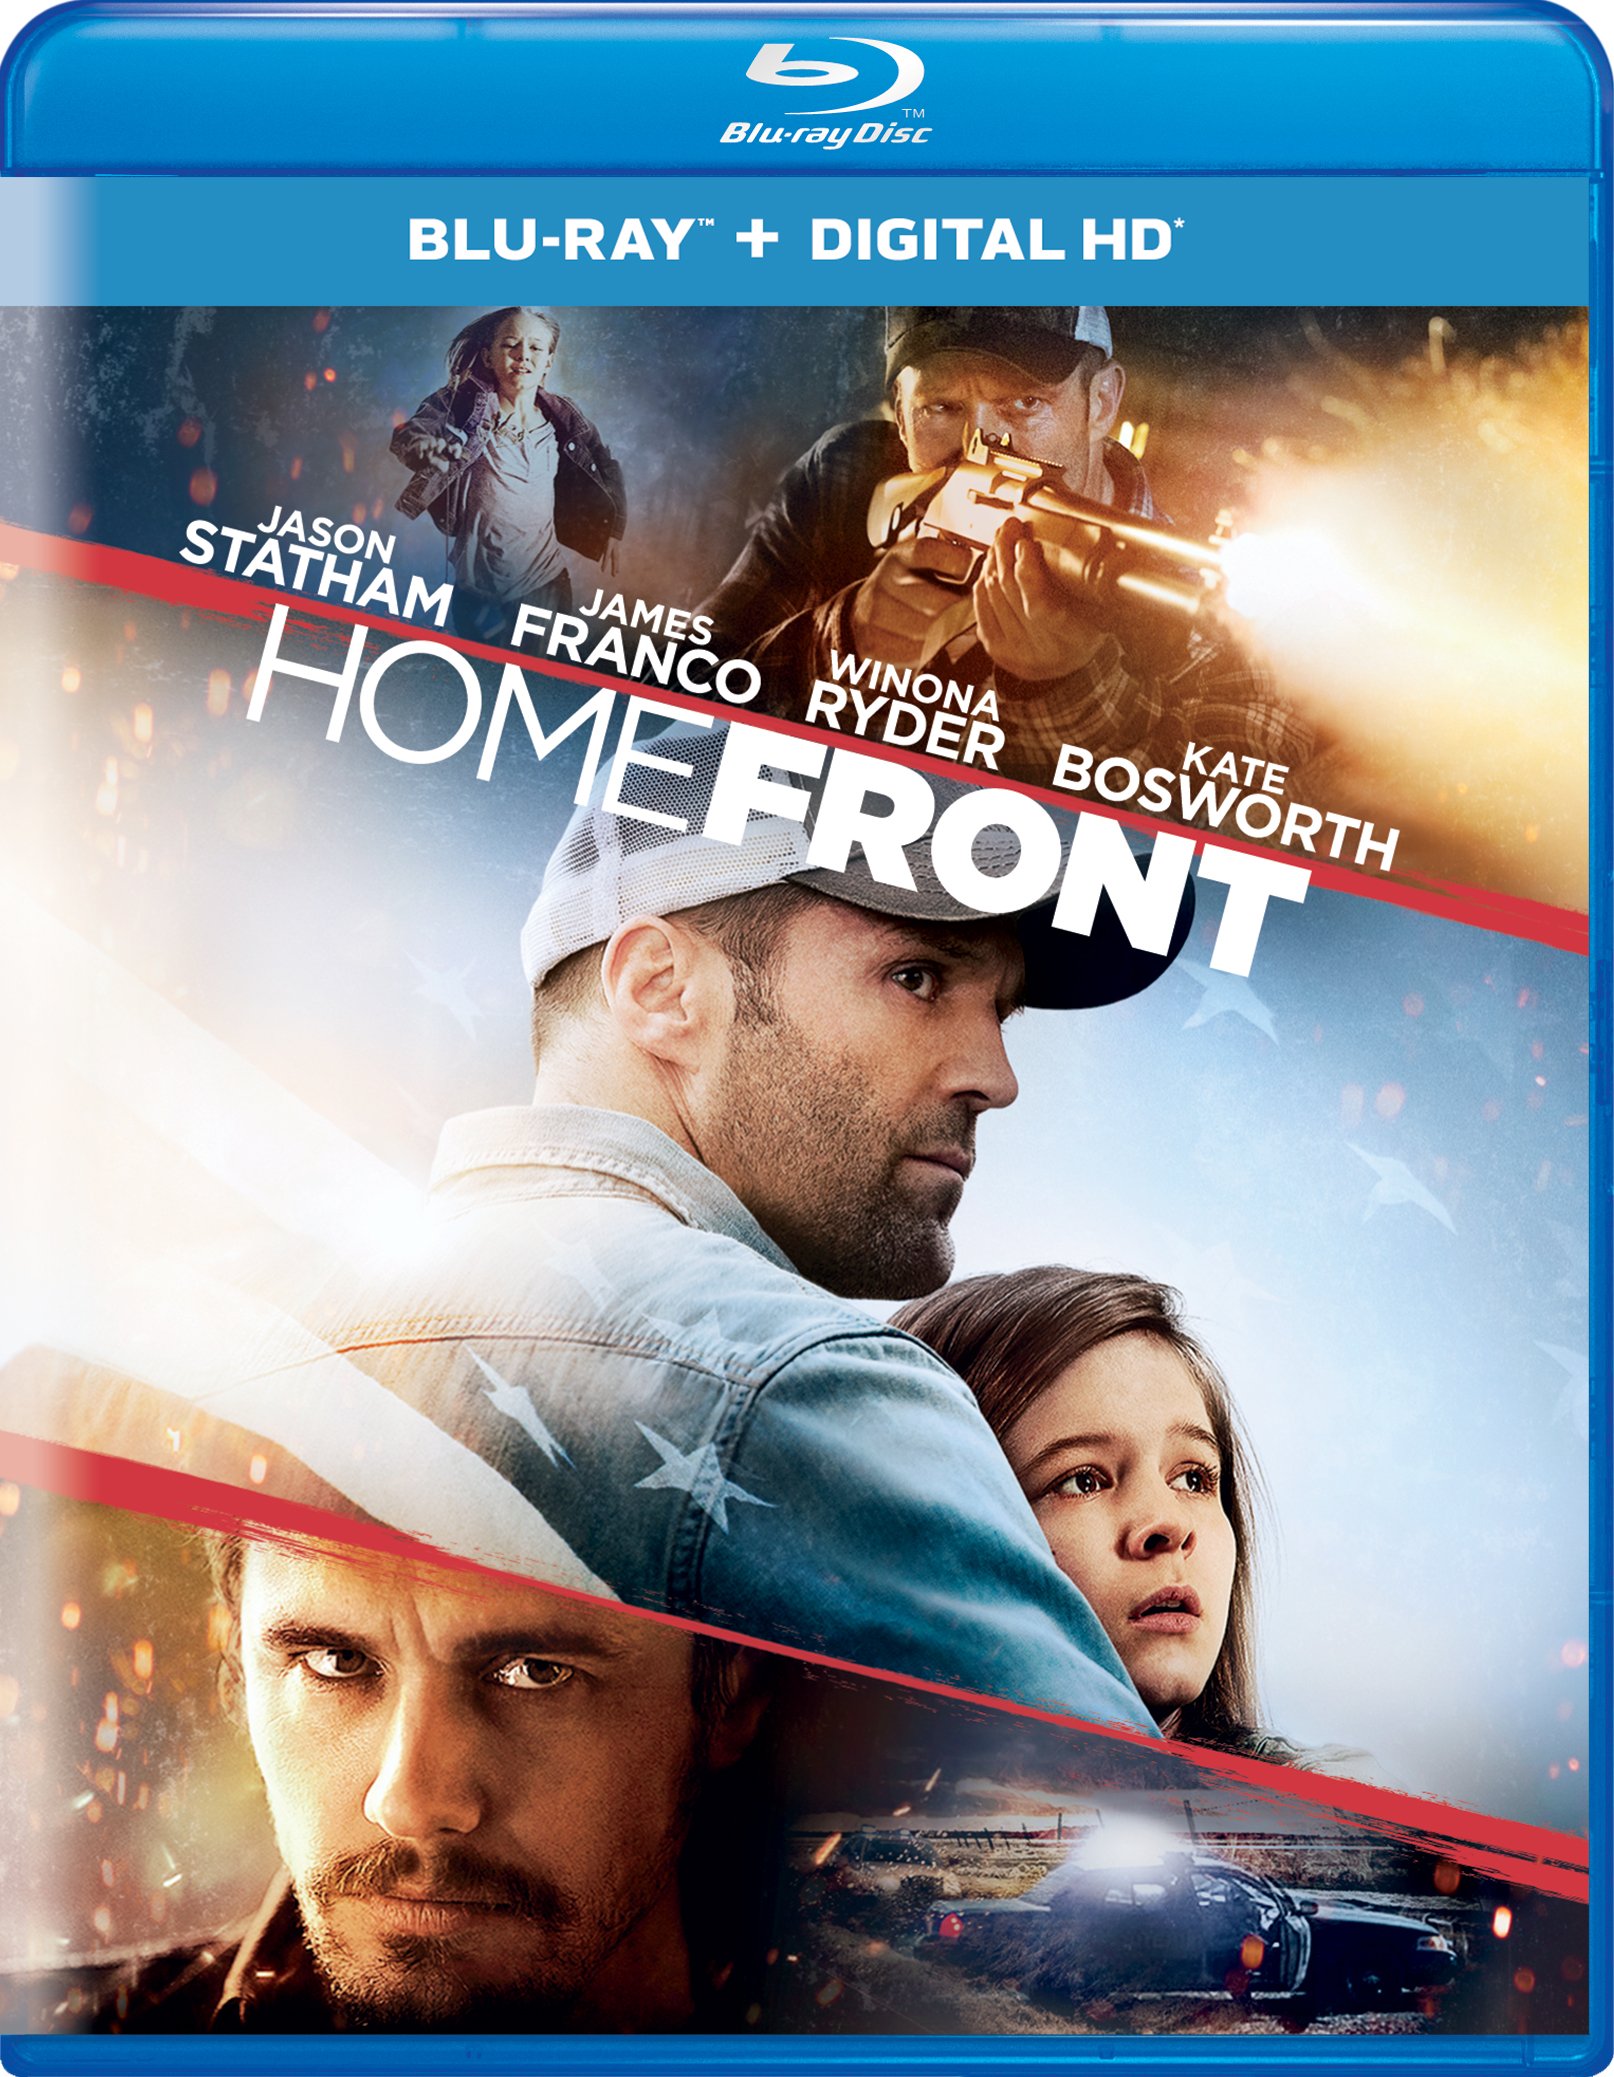 Homefront 2 release date